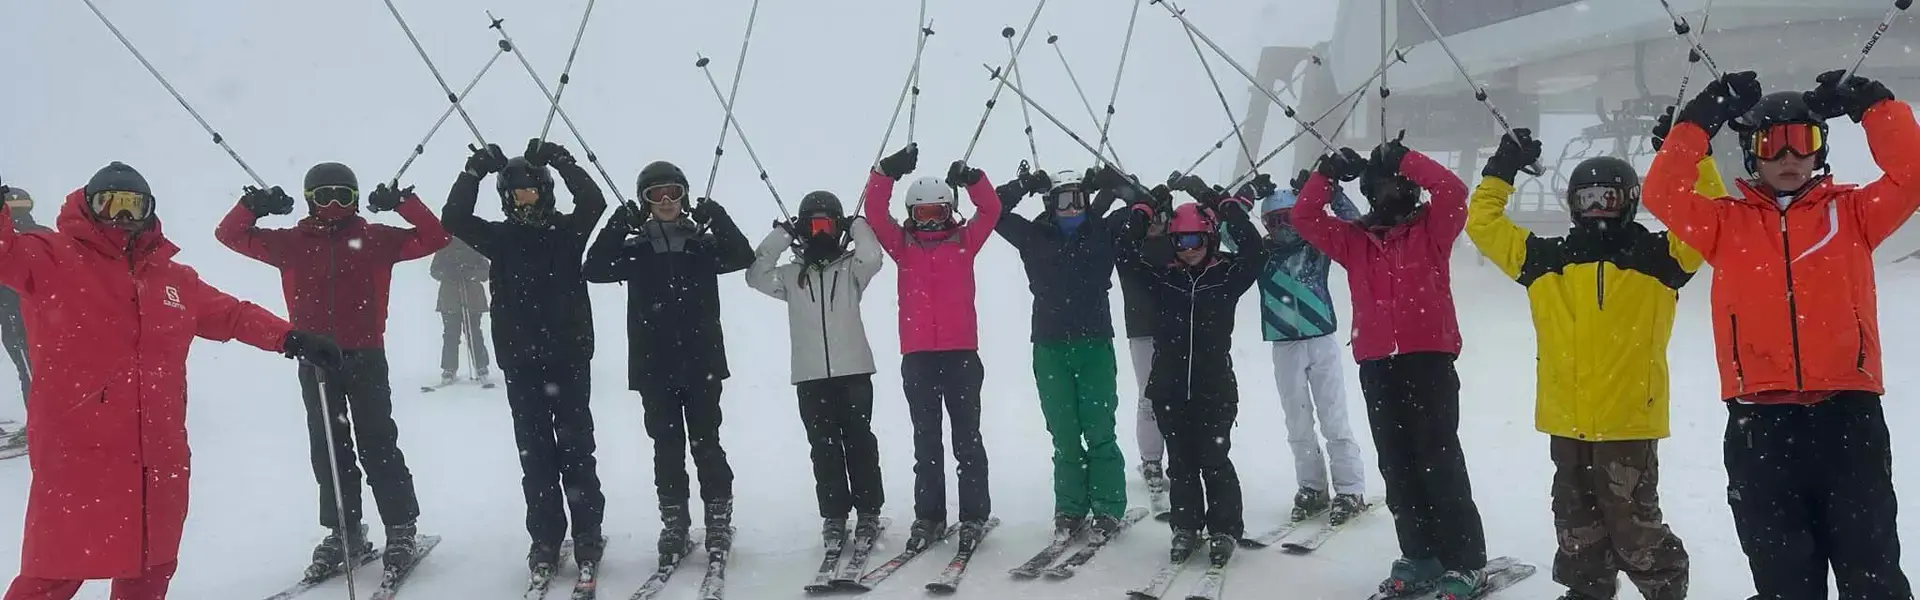 Senior pupils in snow skiing at the Alps | Ibstock Place School, a private school near Richmond, Barnes, Putney, Kingston, and Wandsworth.